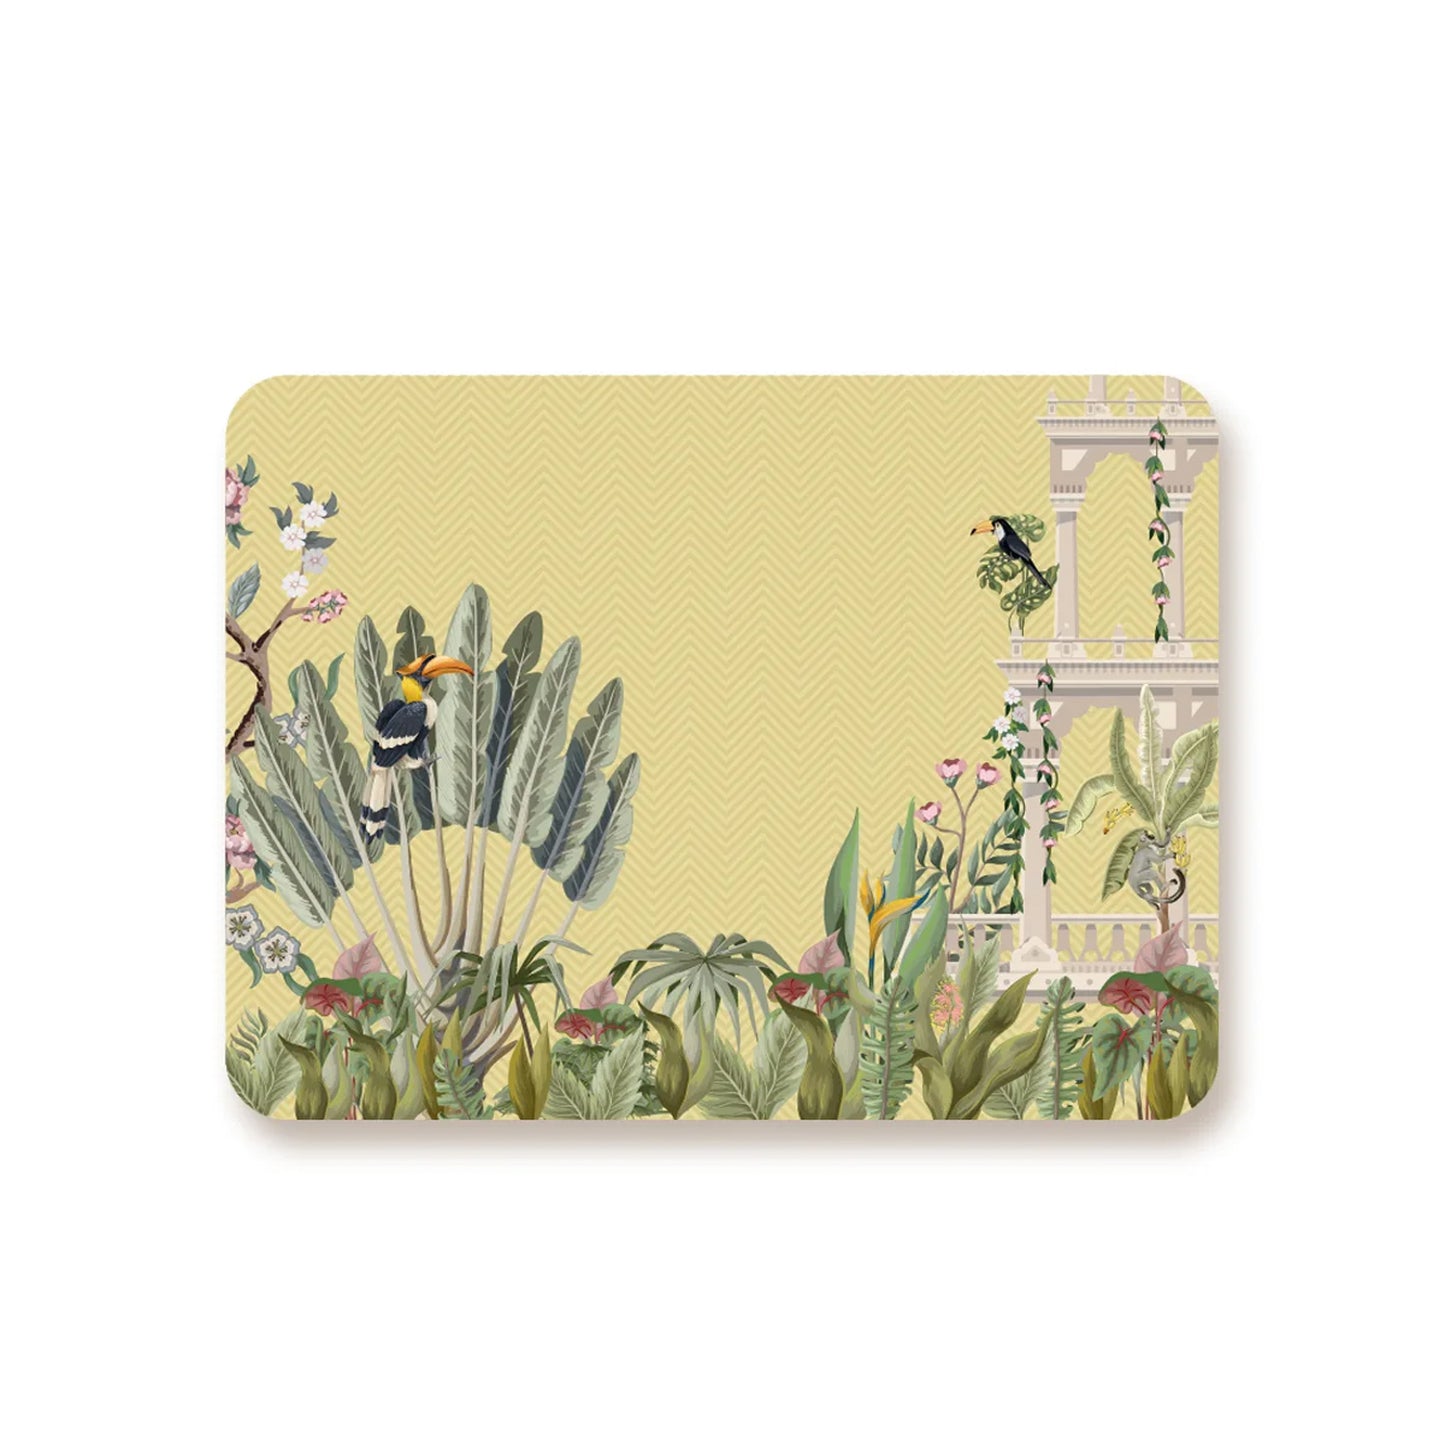 “Tropical Paradise” Tablemats | TM 074 (set of 2)